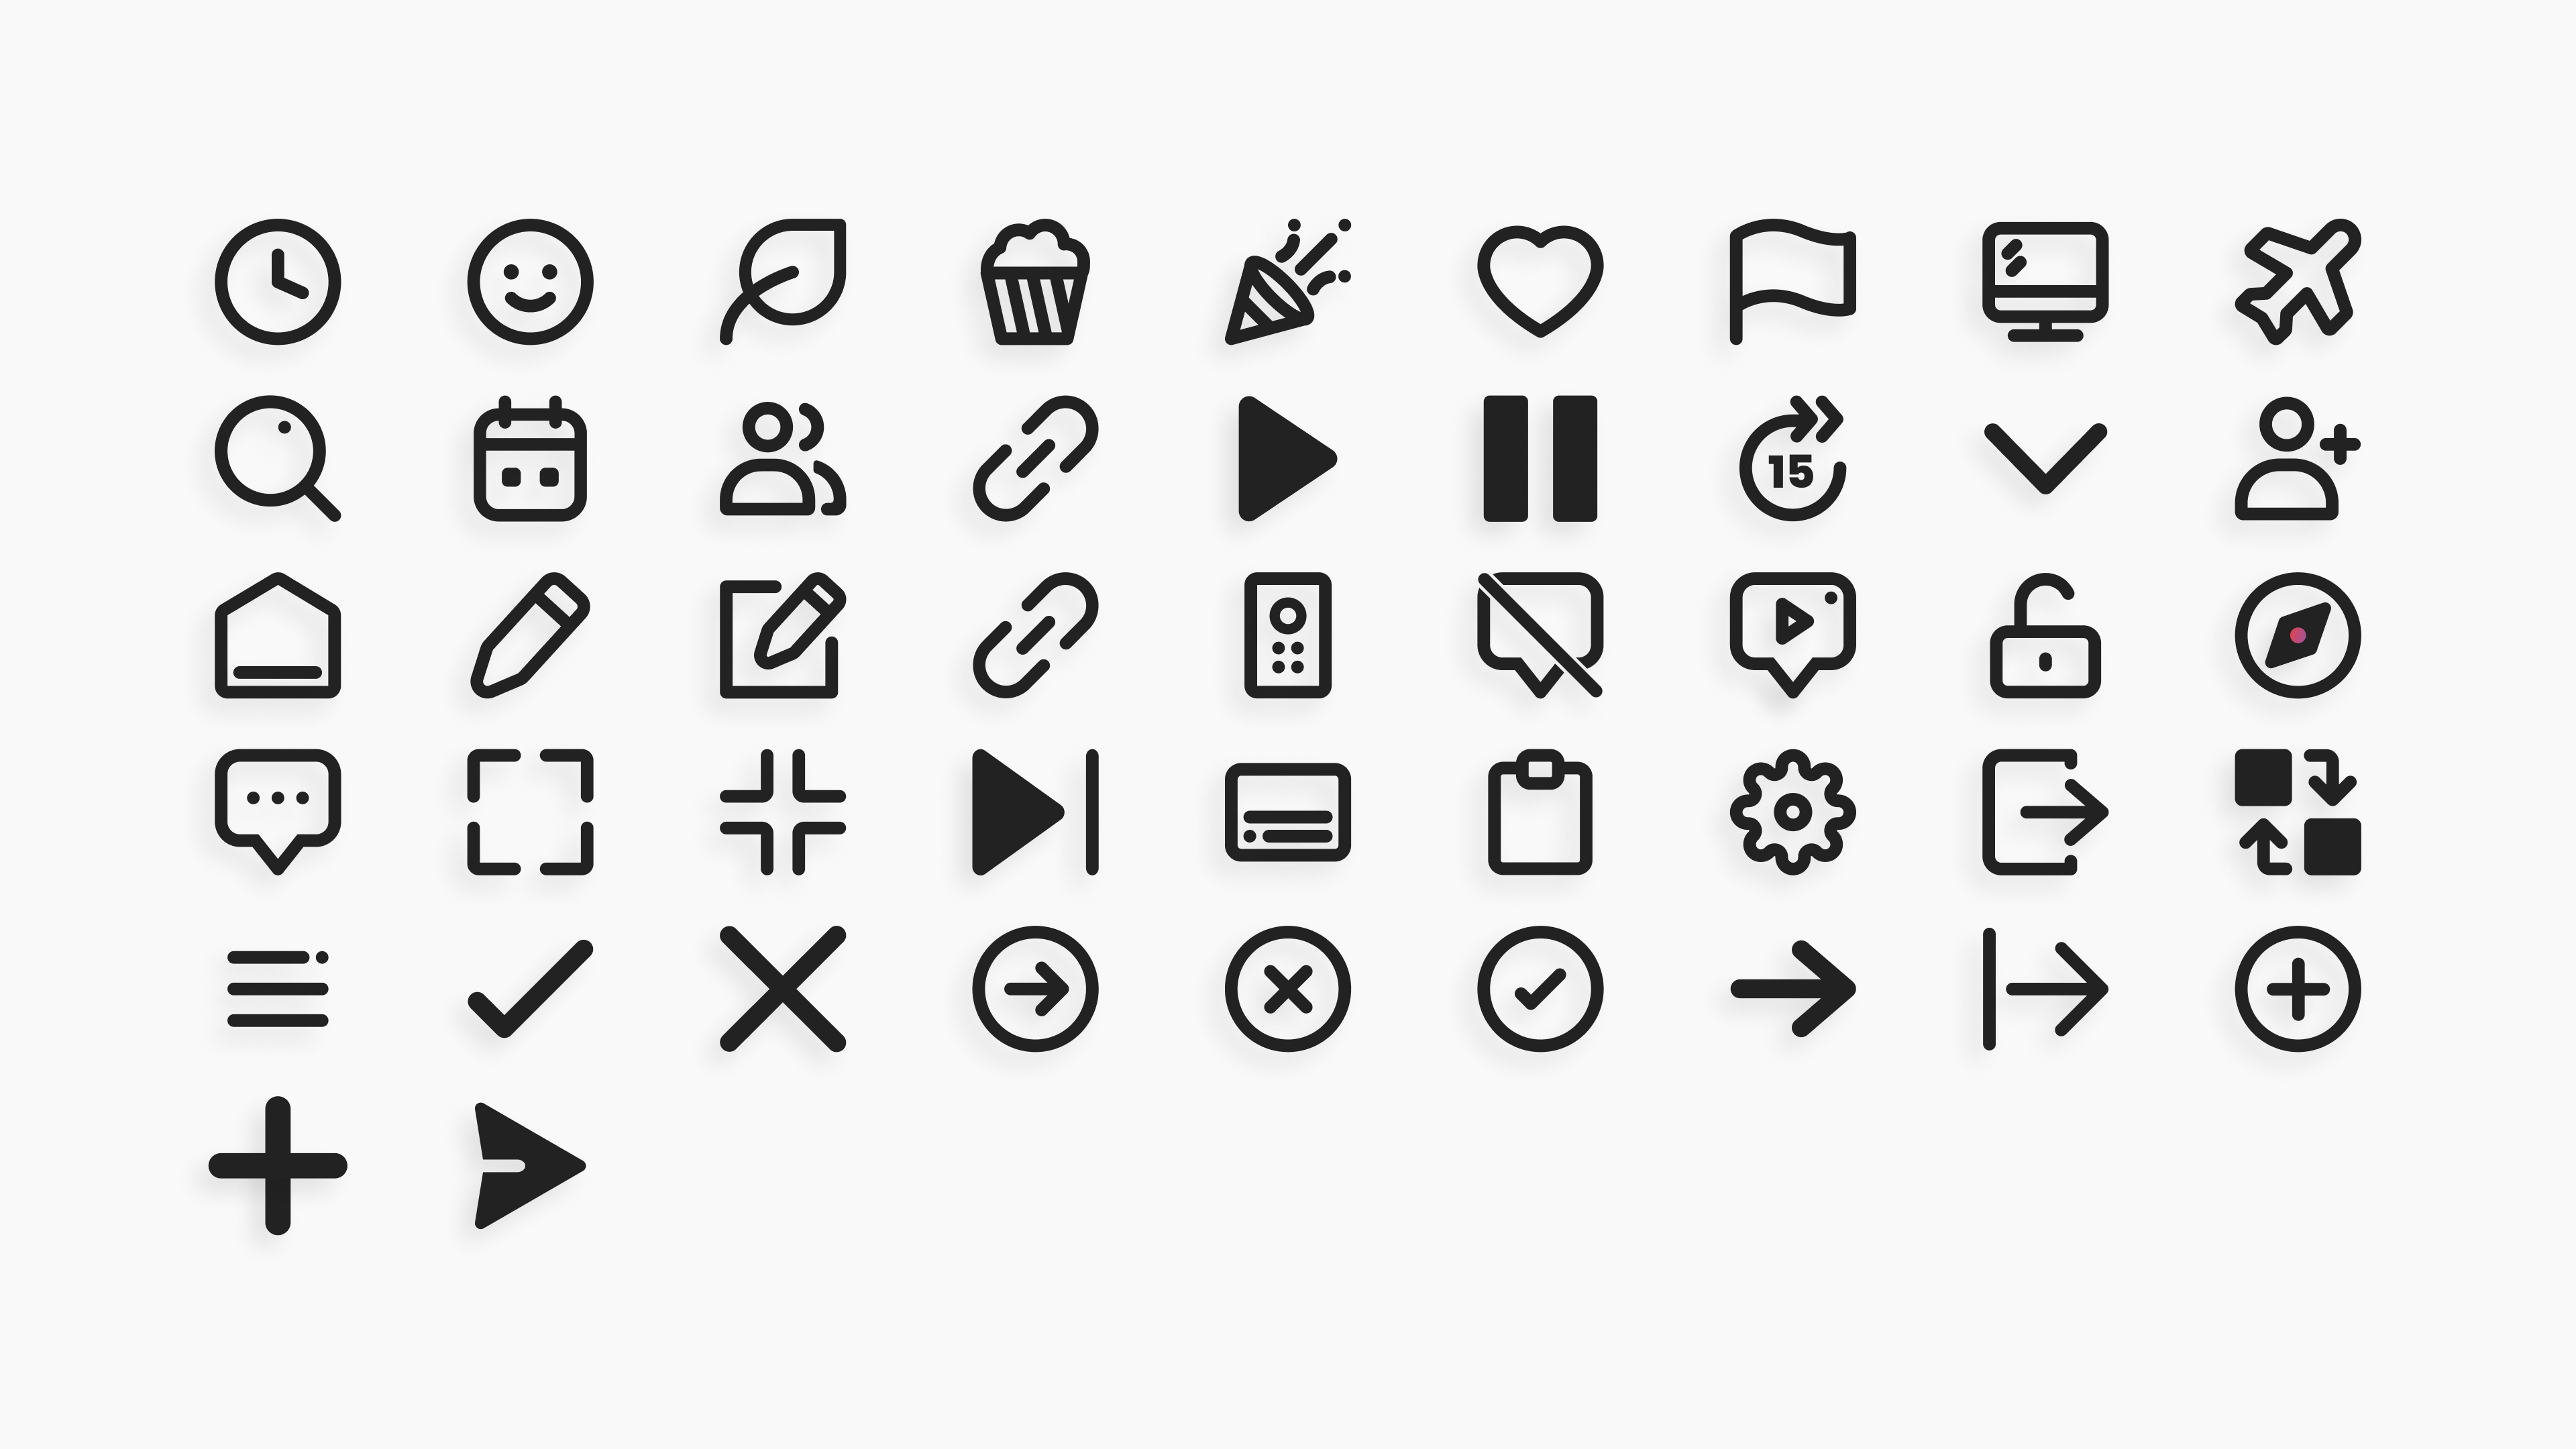 Redesigned the entire icon set, tailored specifically for the Teleparty use case. The icons feature rounded shapes and a distinct style, setting them apart from other available icons.